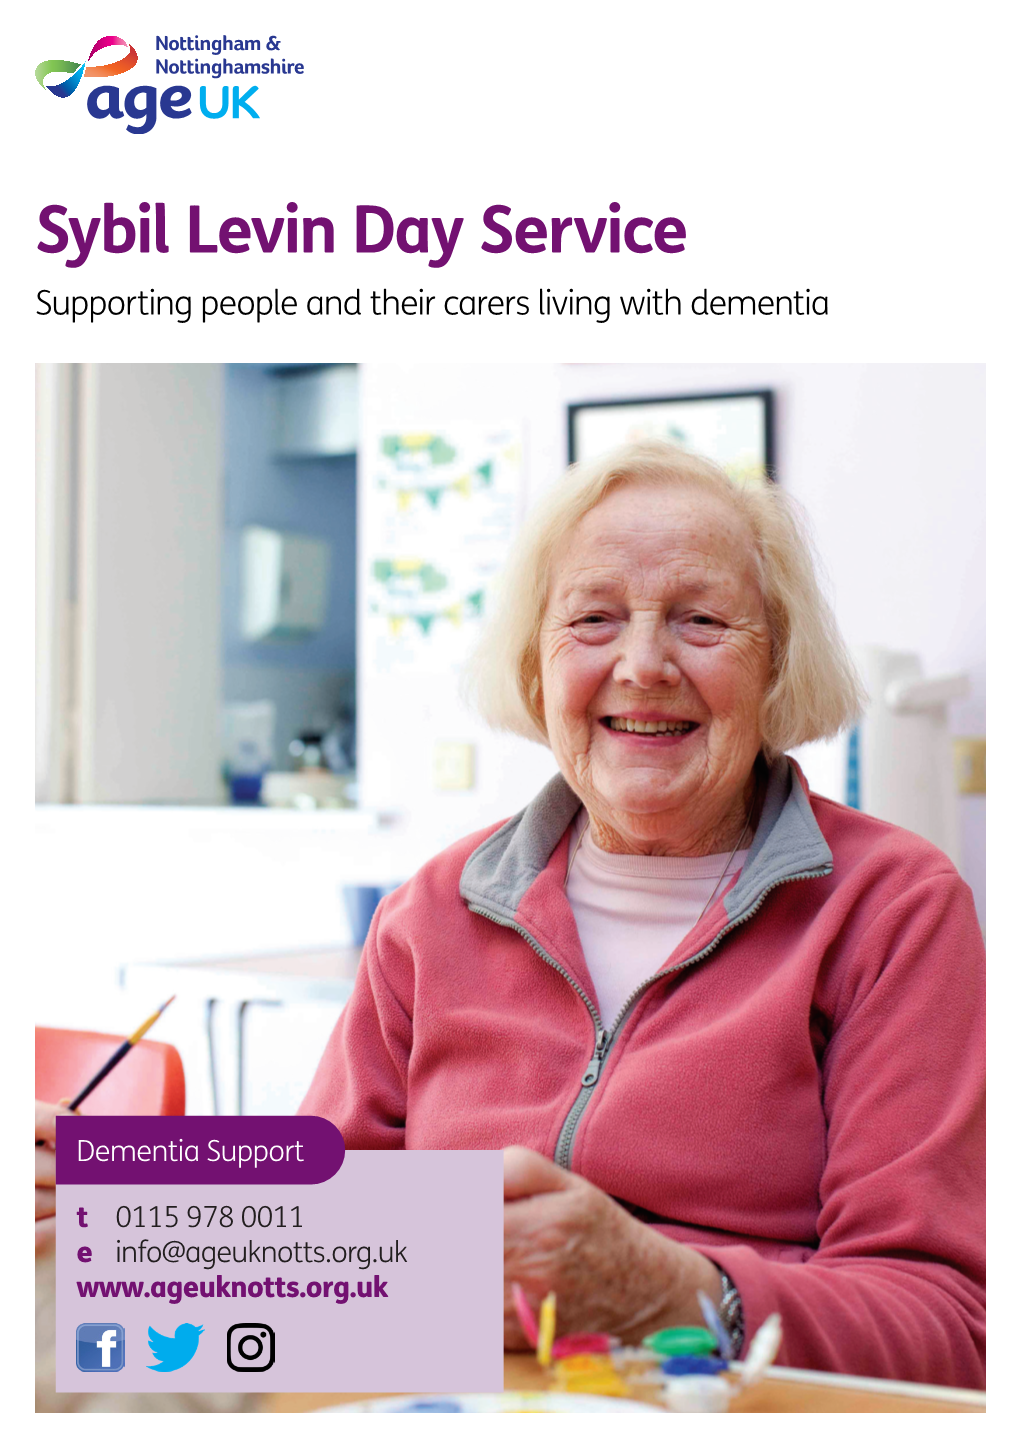 Sybil Levin Day Service Supporting People and Their Carers Living with Dementia